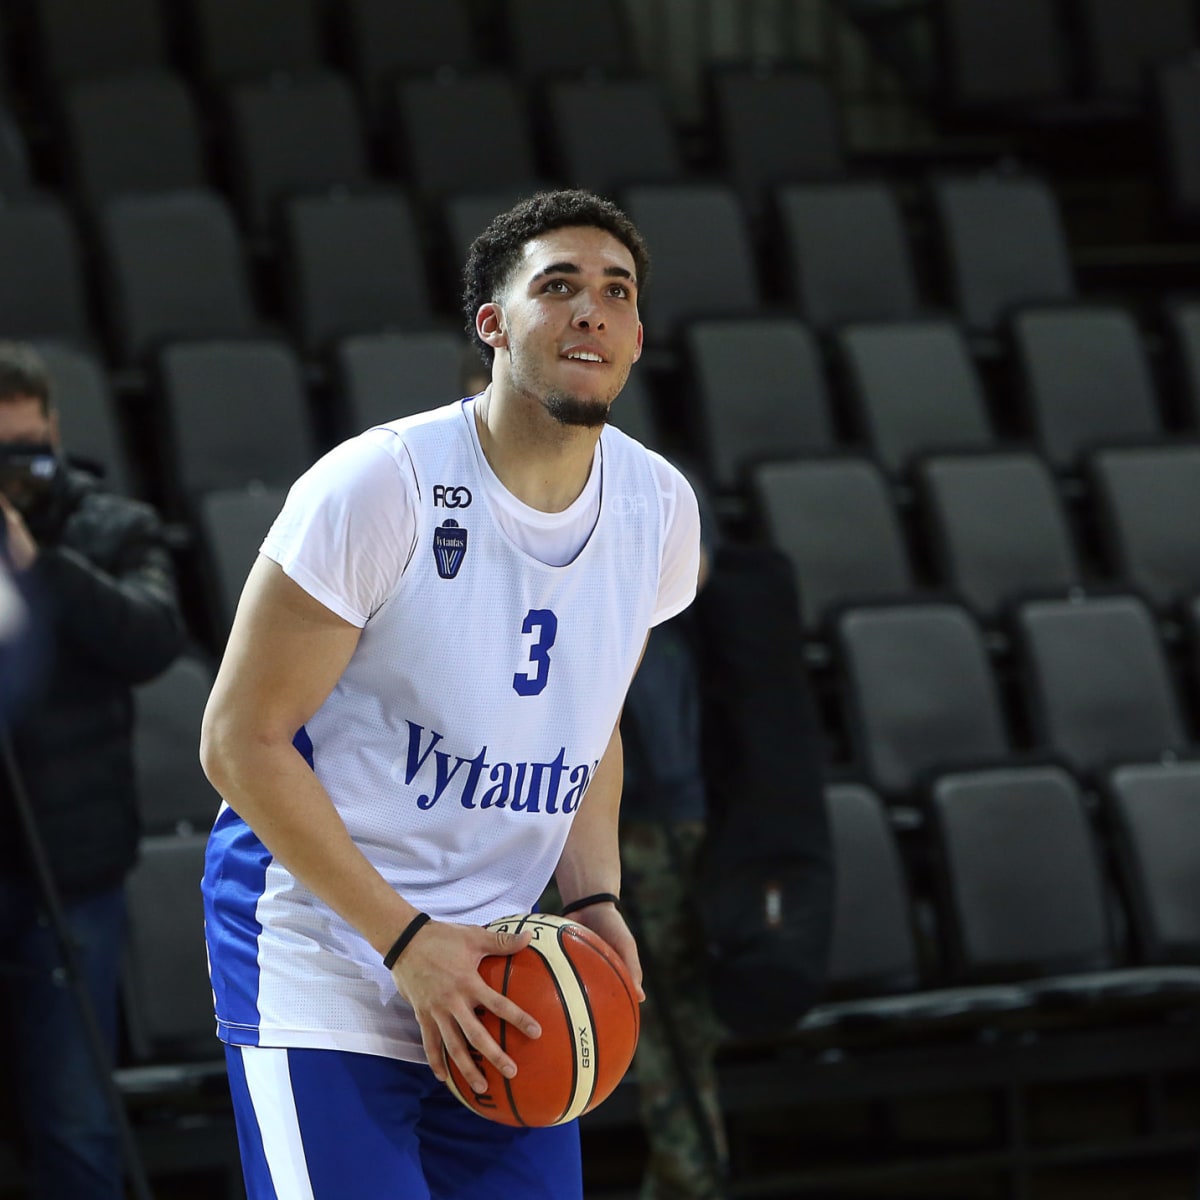 LiAngelo Ball signs with NBA G League